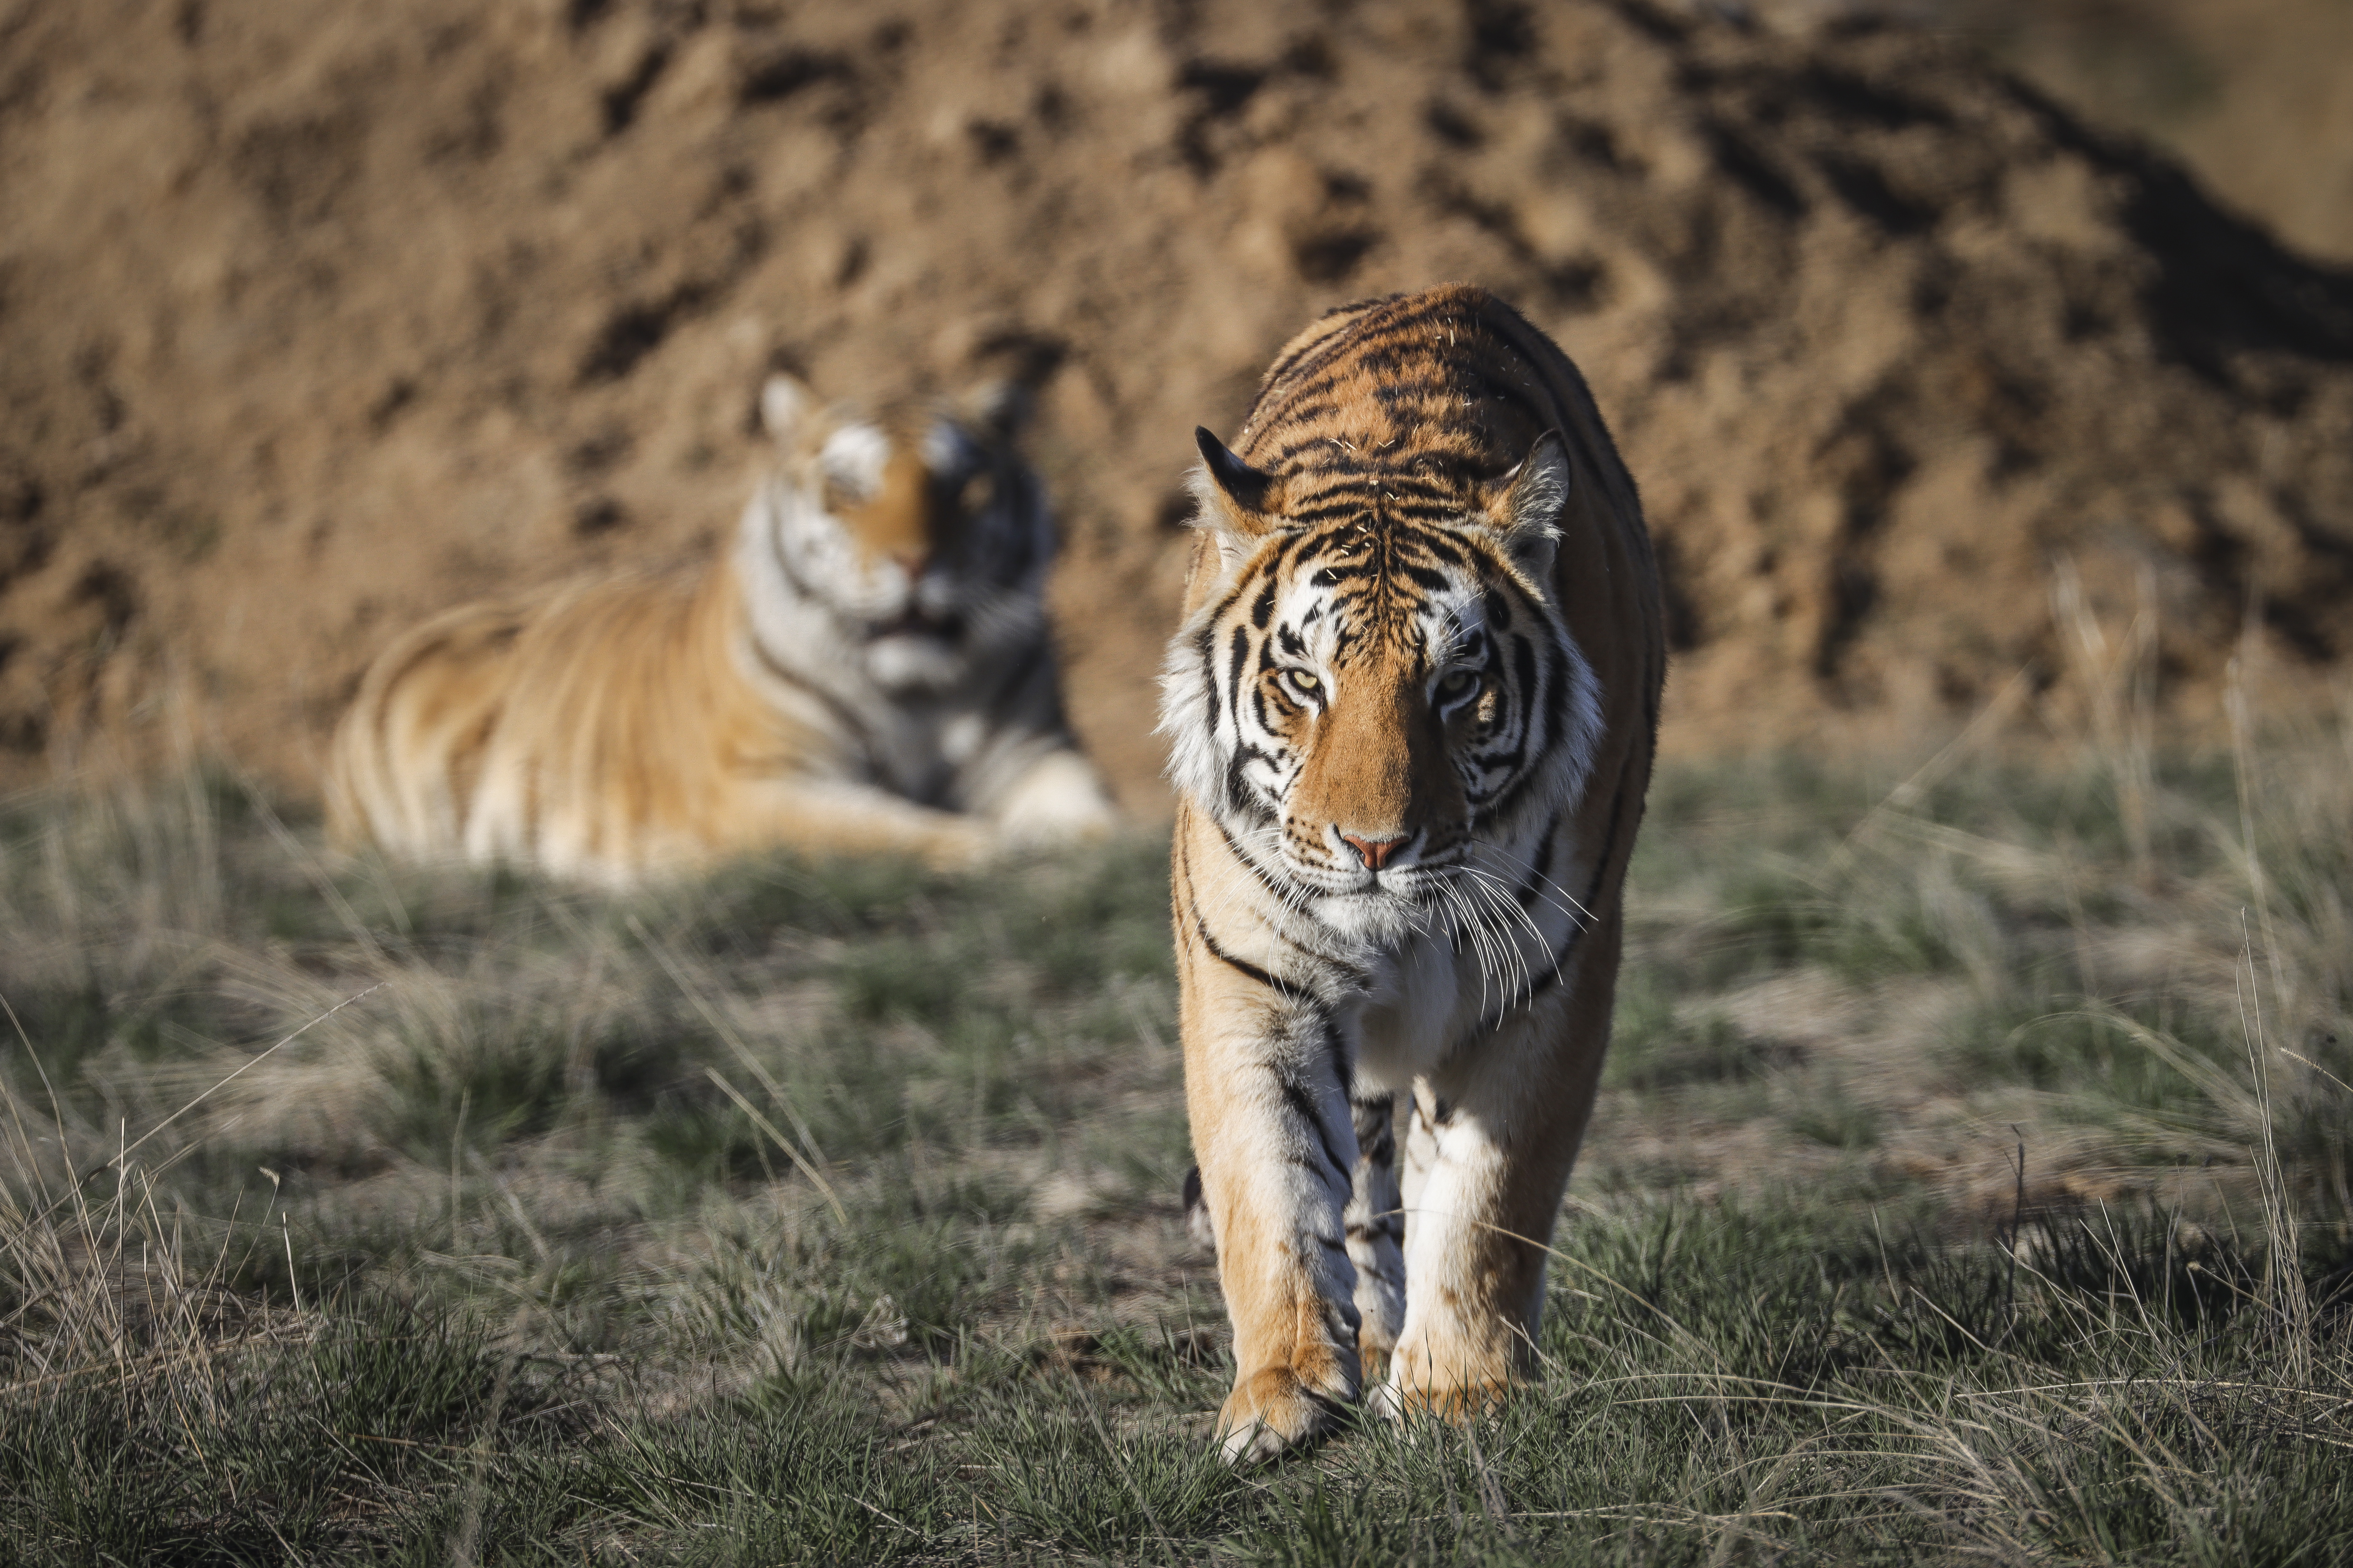 The Big Cat Public Safety Act, inspired by Tiger King, may become law